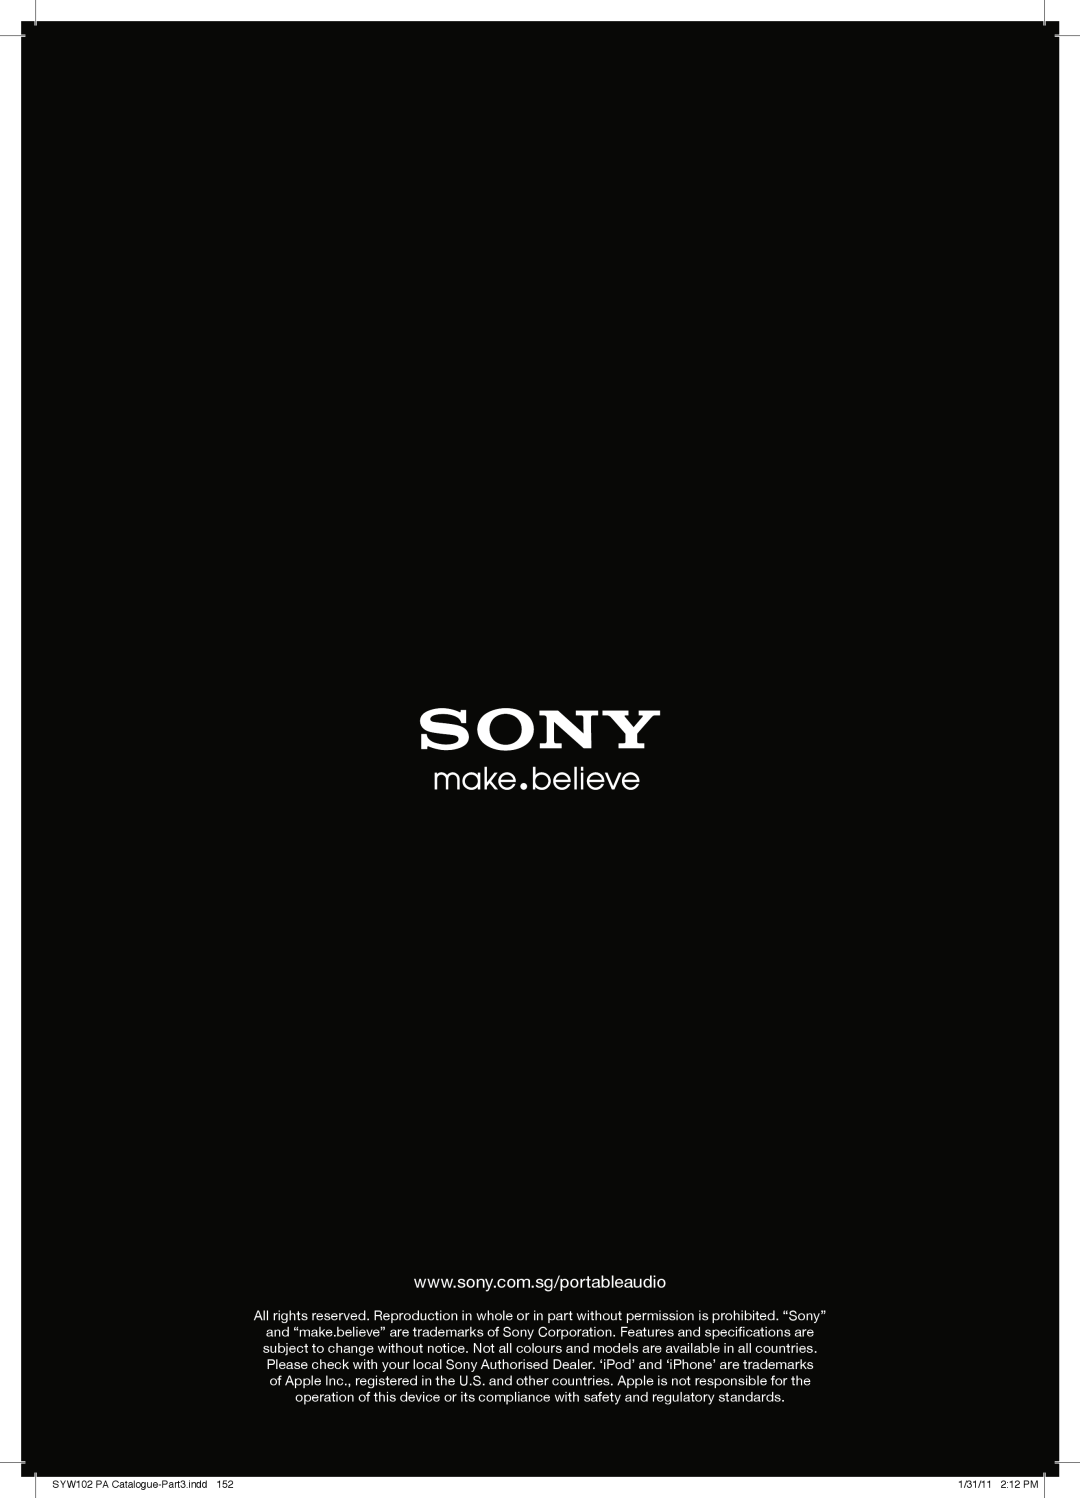 Sony MDRPQ4/PNK manual SYW102 PA Catalogue-Part3.indd152, 1/31/11 2 12 PM 